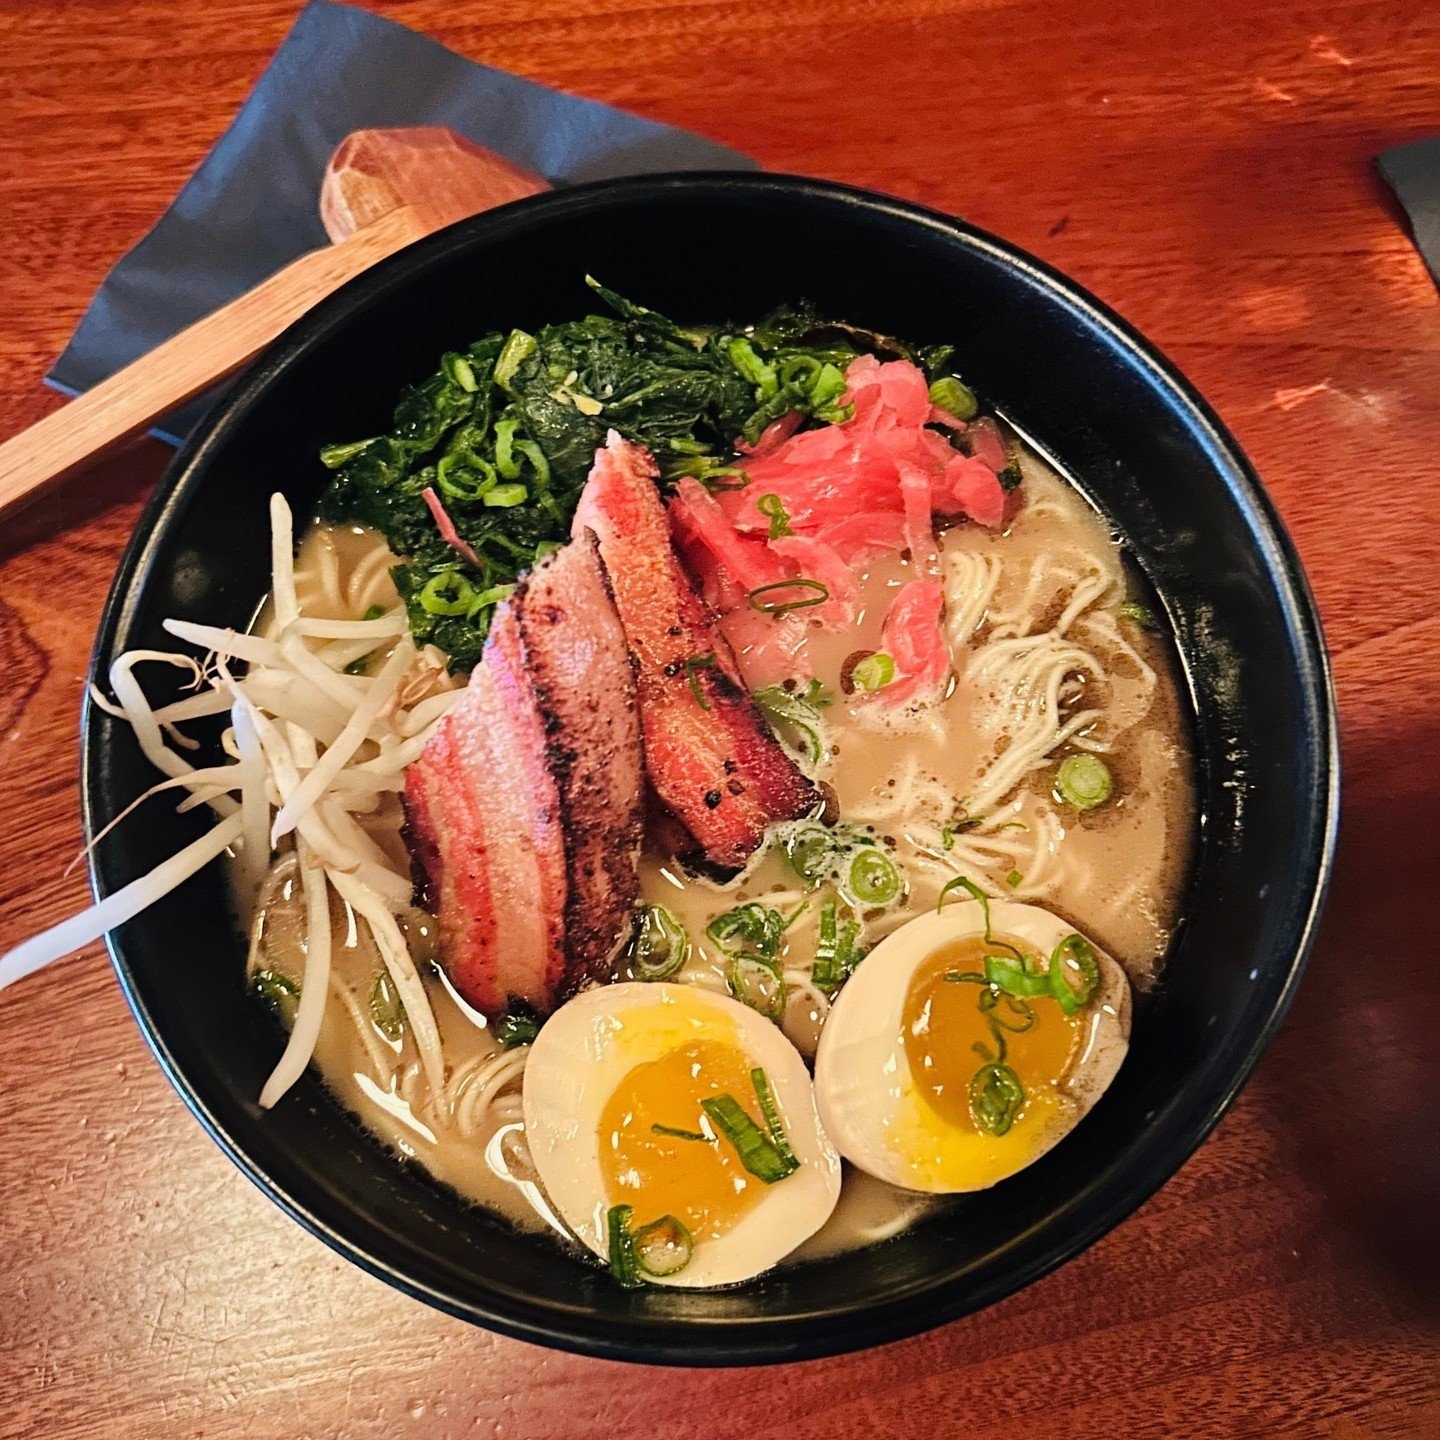 Ramen &ndash; Where soup &amp; noodles become &quot;broth-ers&quot; 😏🍜 Featured here: our Tonkotsu made with roasted pork belly, mustard greens, bean sprouts, pickled red onions, black garlic oil, scallions, &amp; a soy marinated egg 😋